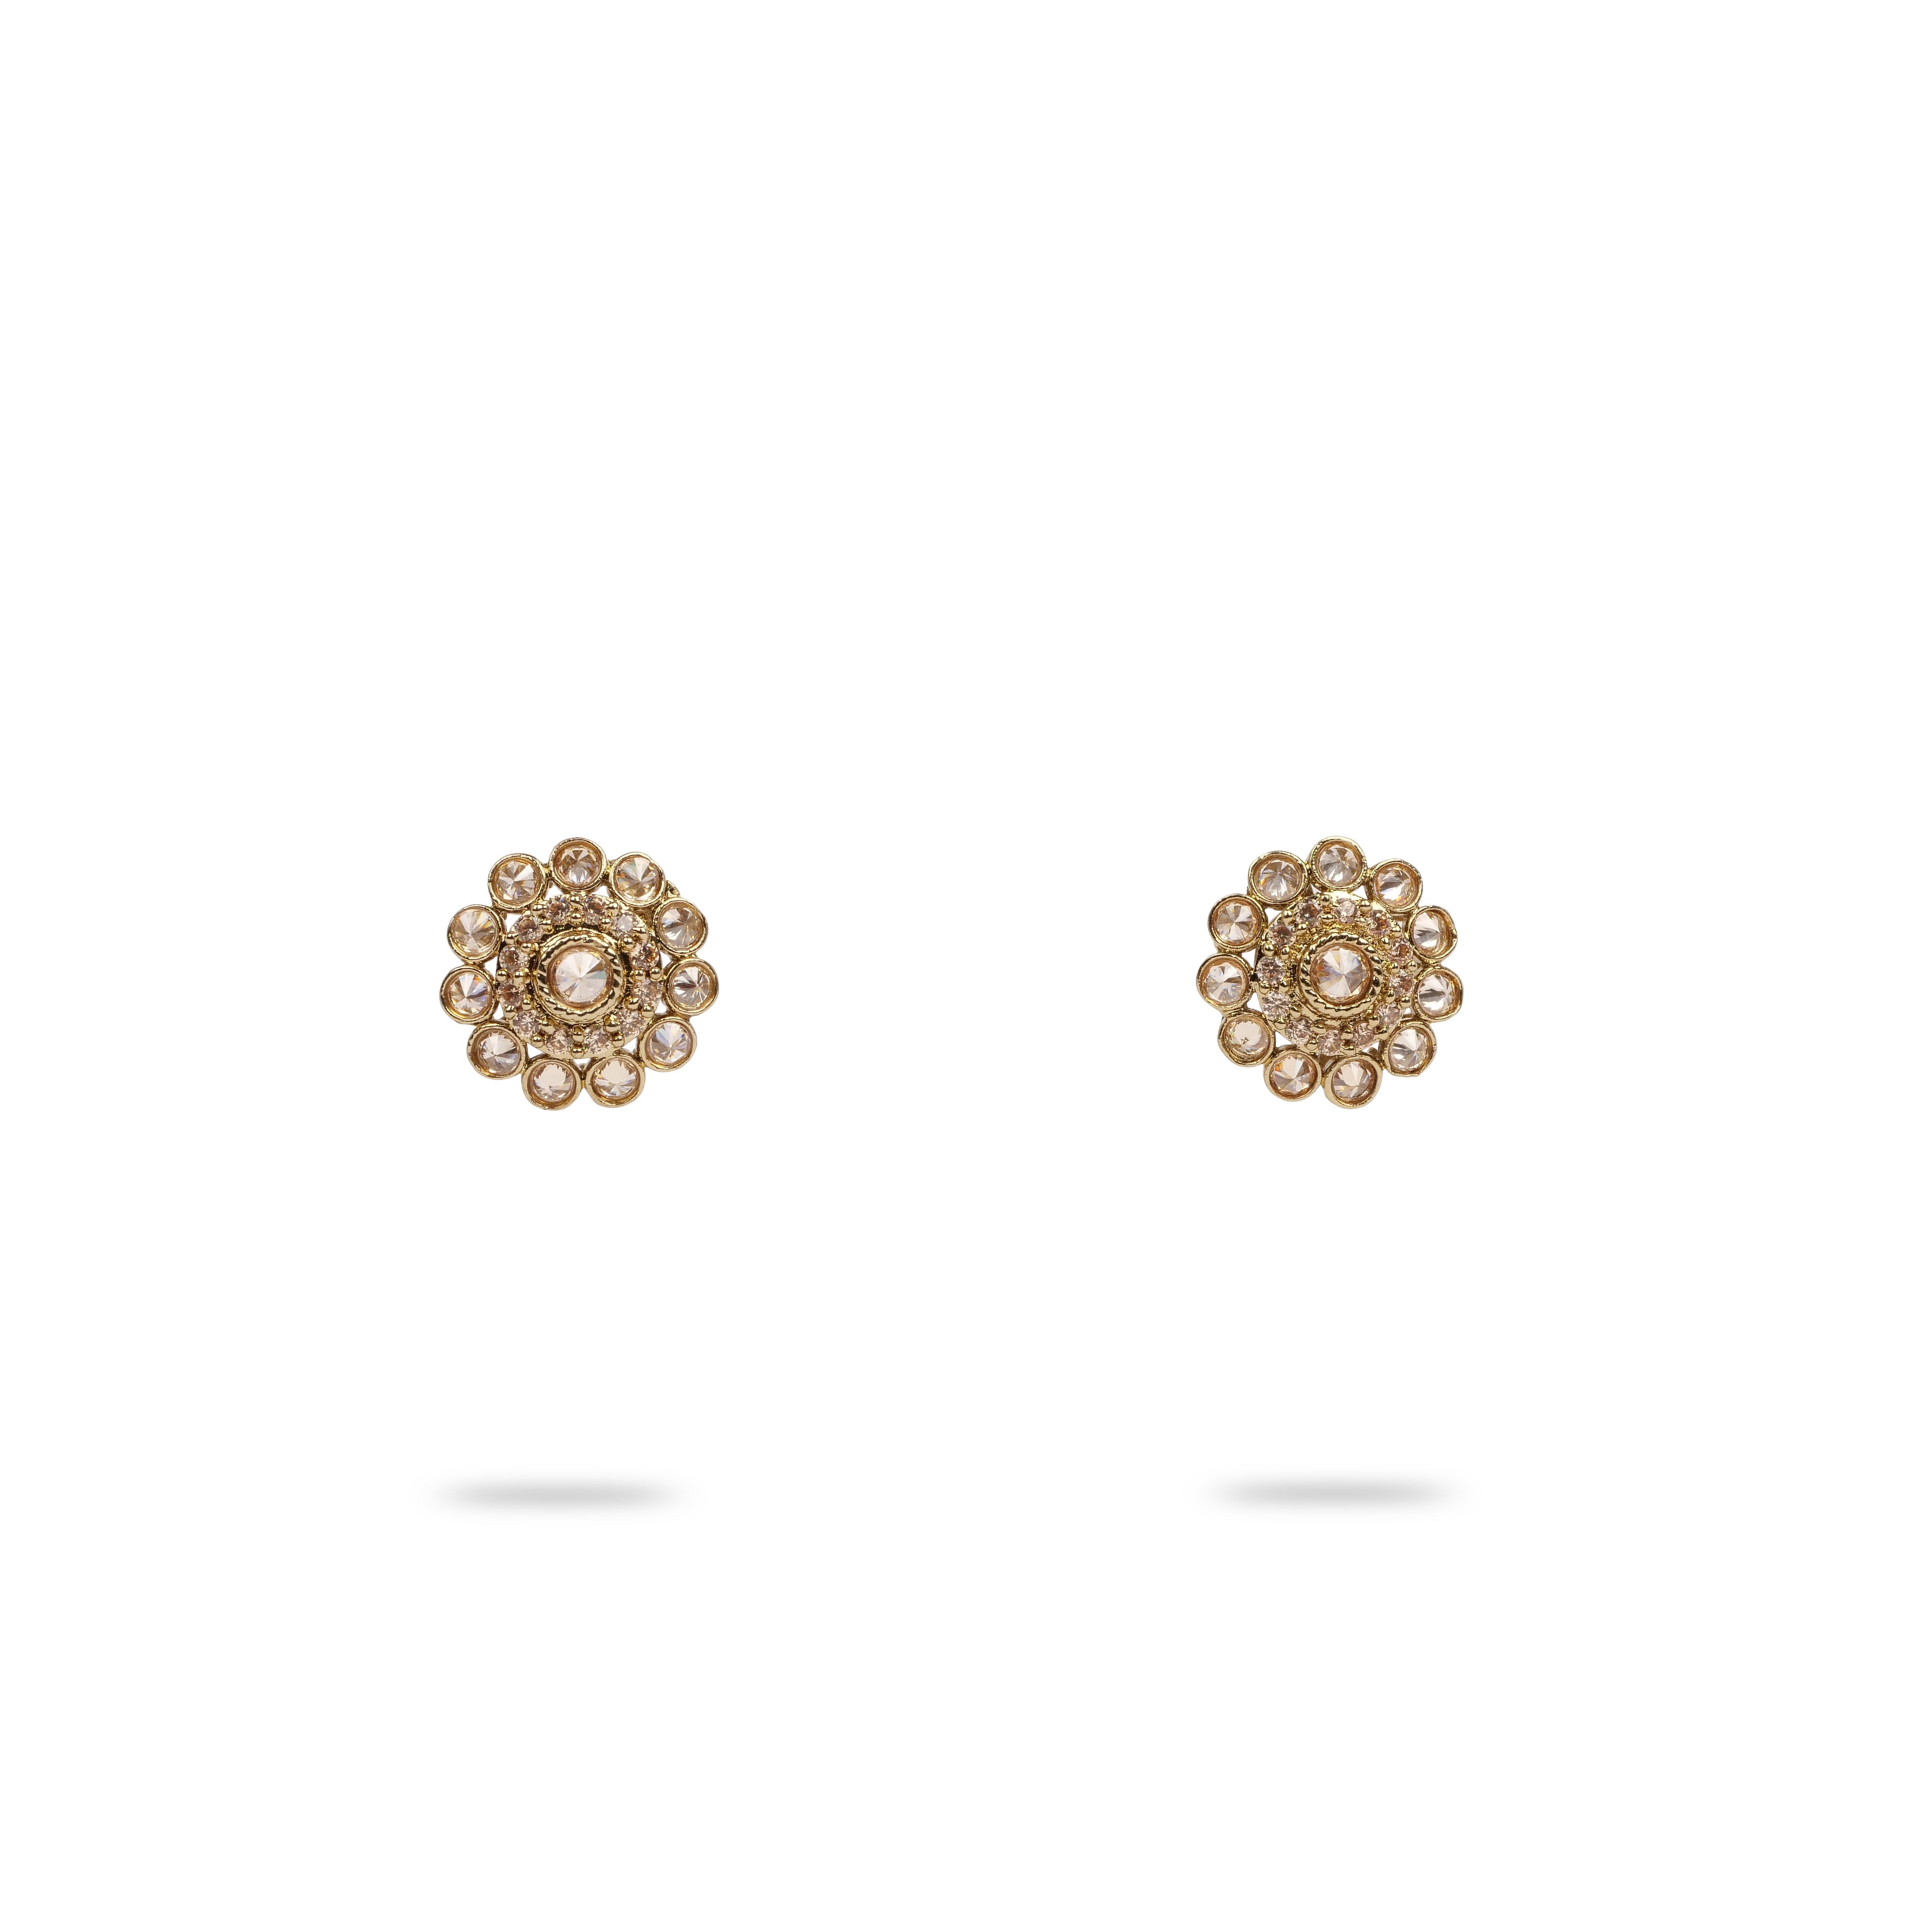 Antique Gold Stud Earrings in Champagne